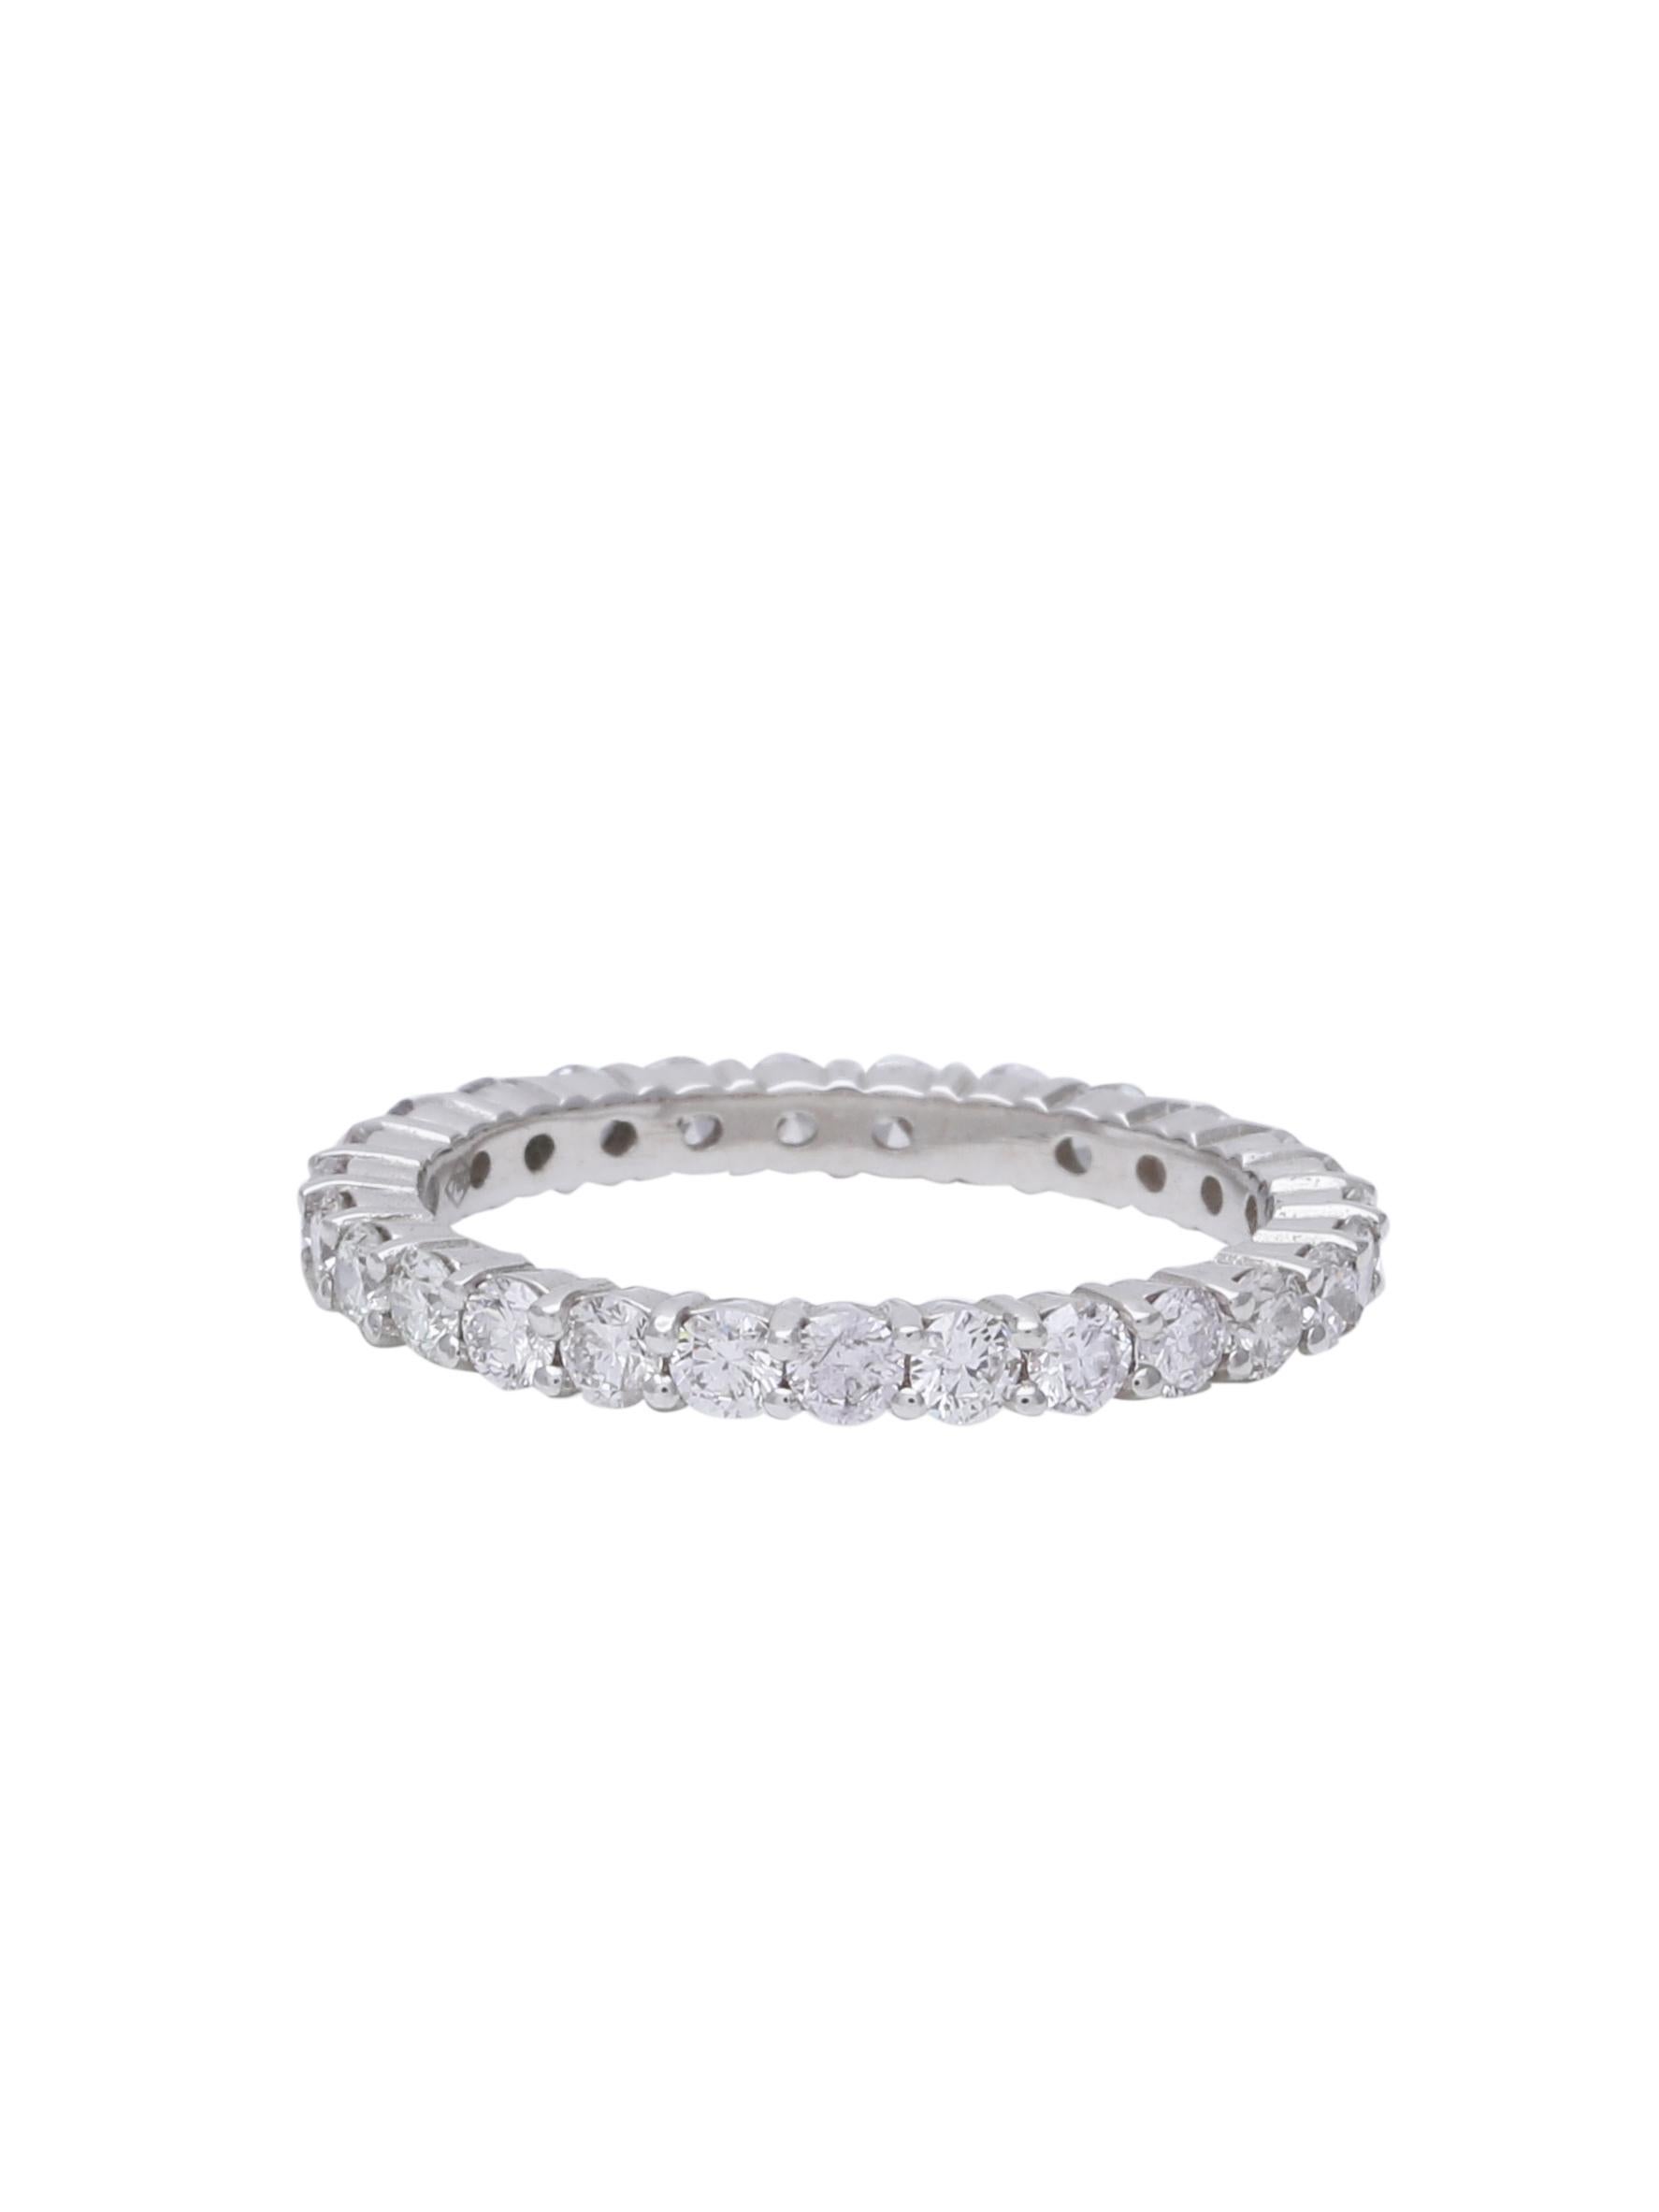 A classic Round Diamonds Eternity band in 18K white Gold. Diamonds weighing 1.14 carats total. The diamonds are all white and good quality. You could wear them as singles or stack them with some other colours.

Great as a wedding band or just a gift